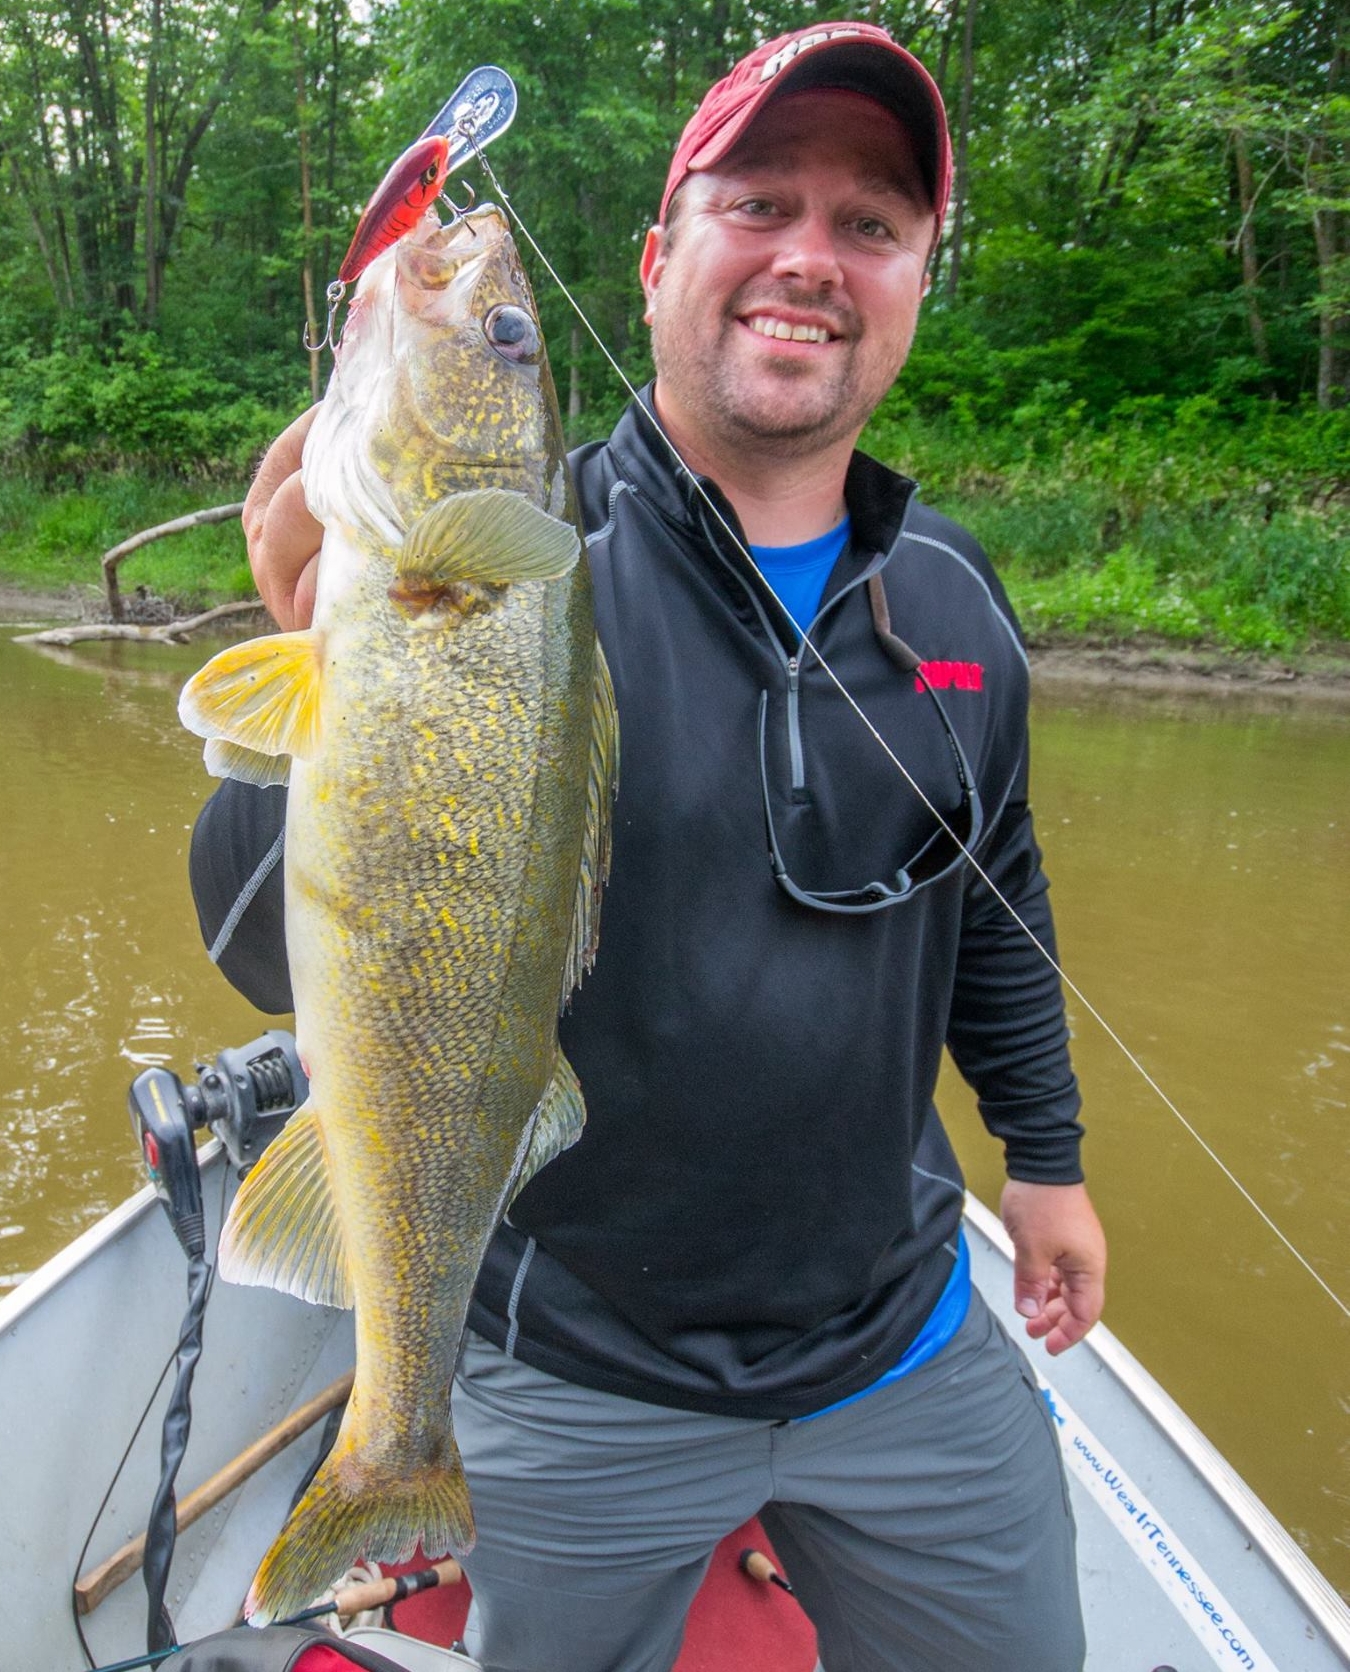 High speed line-counters are a thing! – Target Walleye